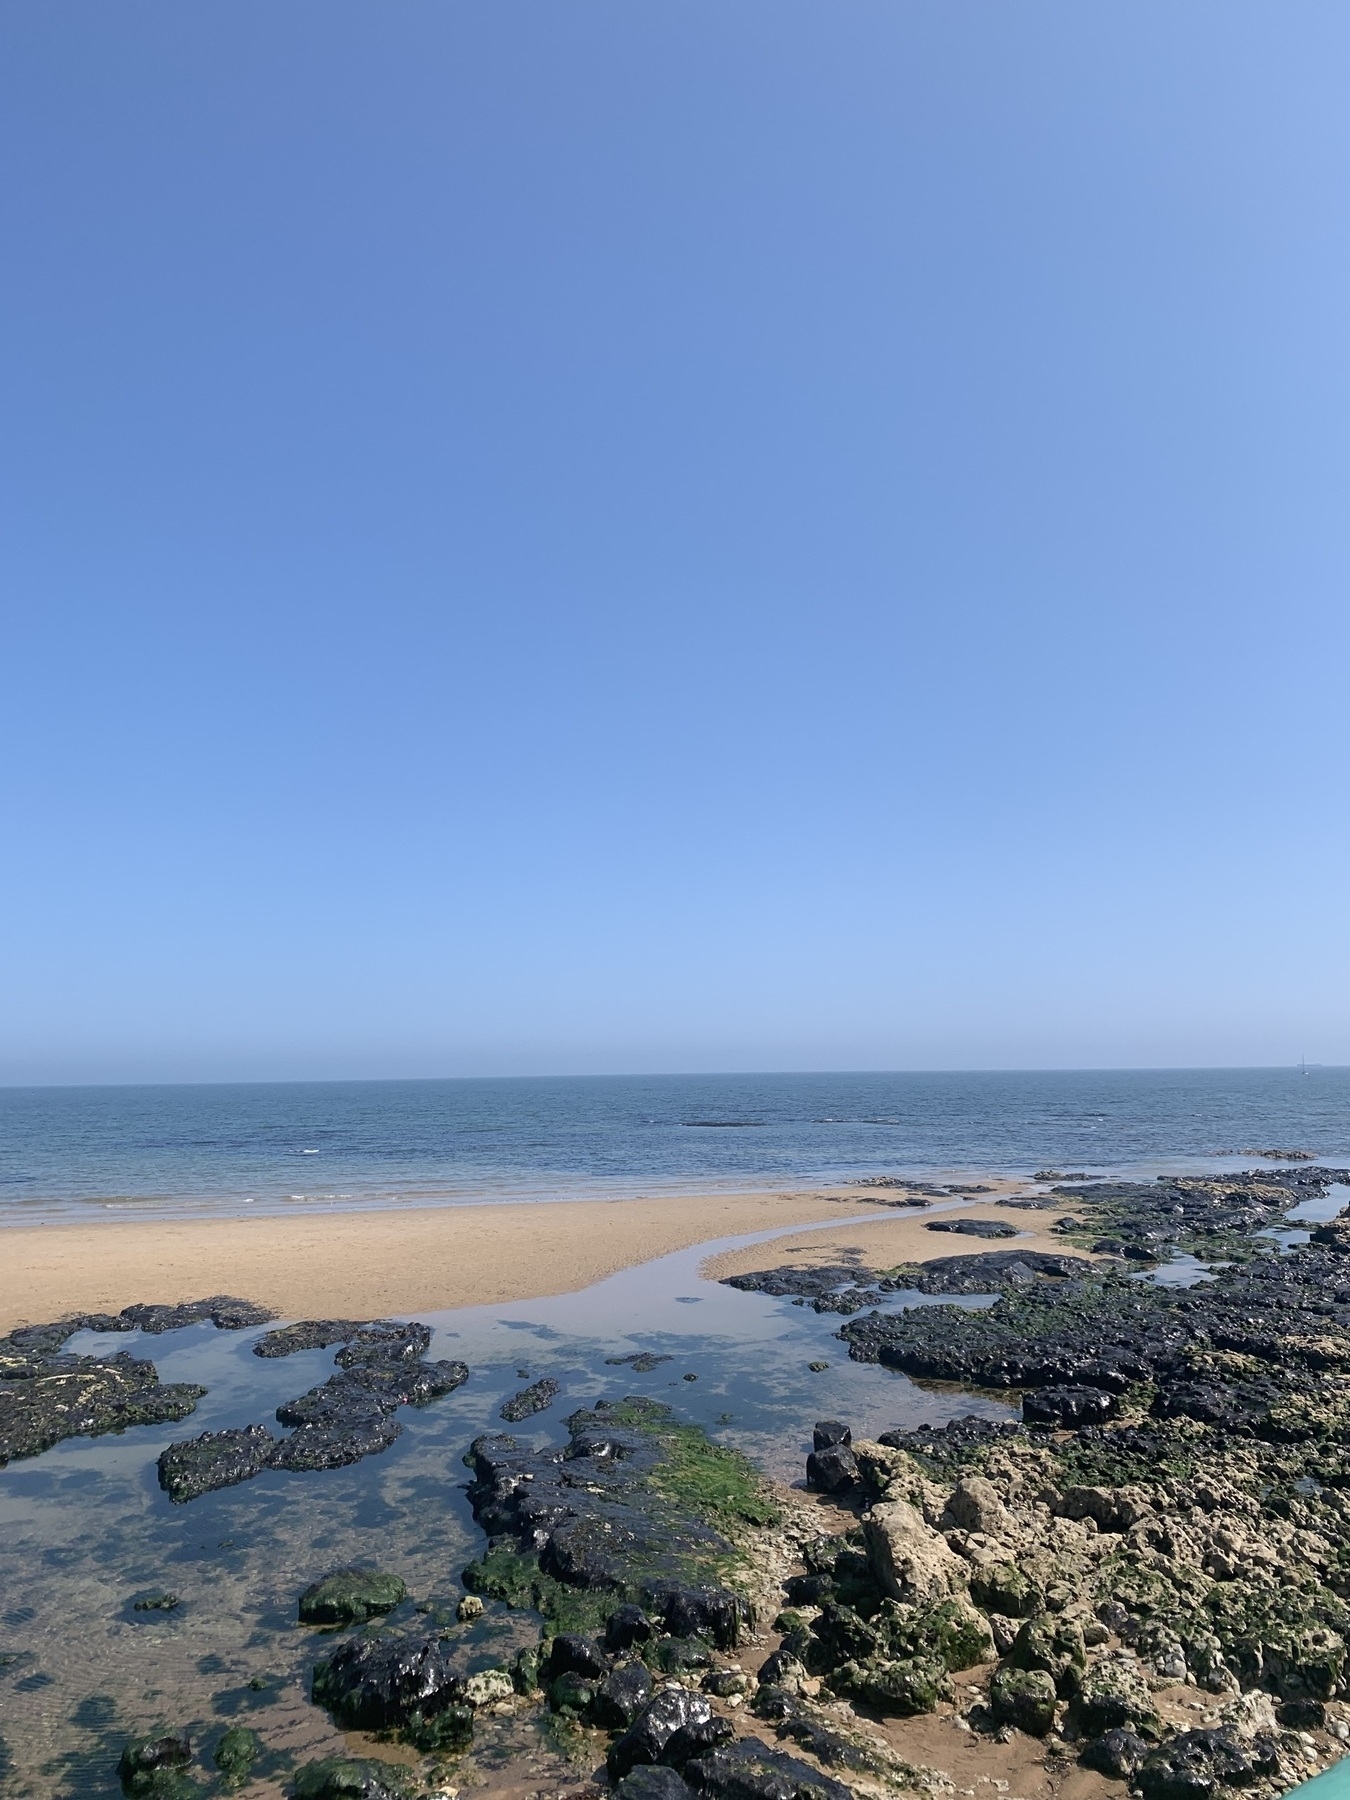 Looking out to sea over sand and rock pools. Dark blue sea blends into a bright blue sky on a sunny day.